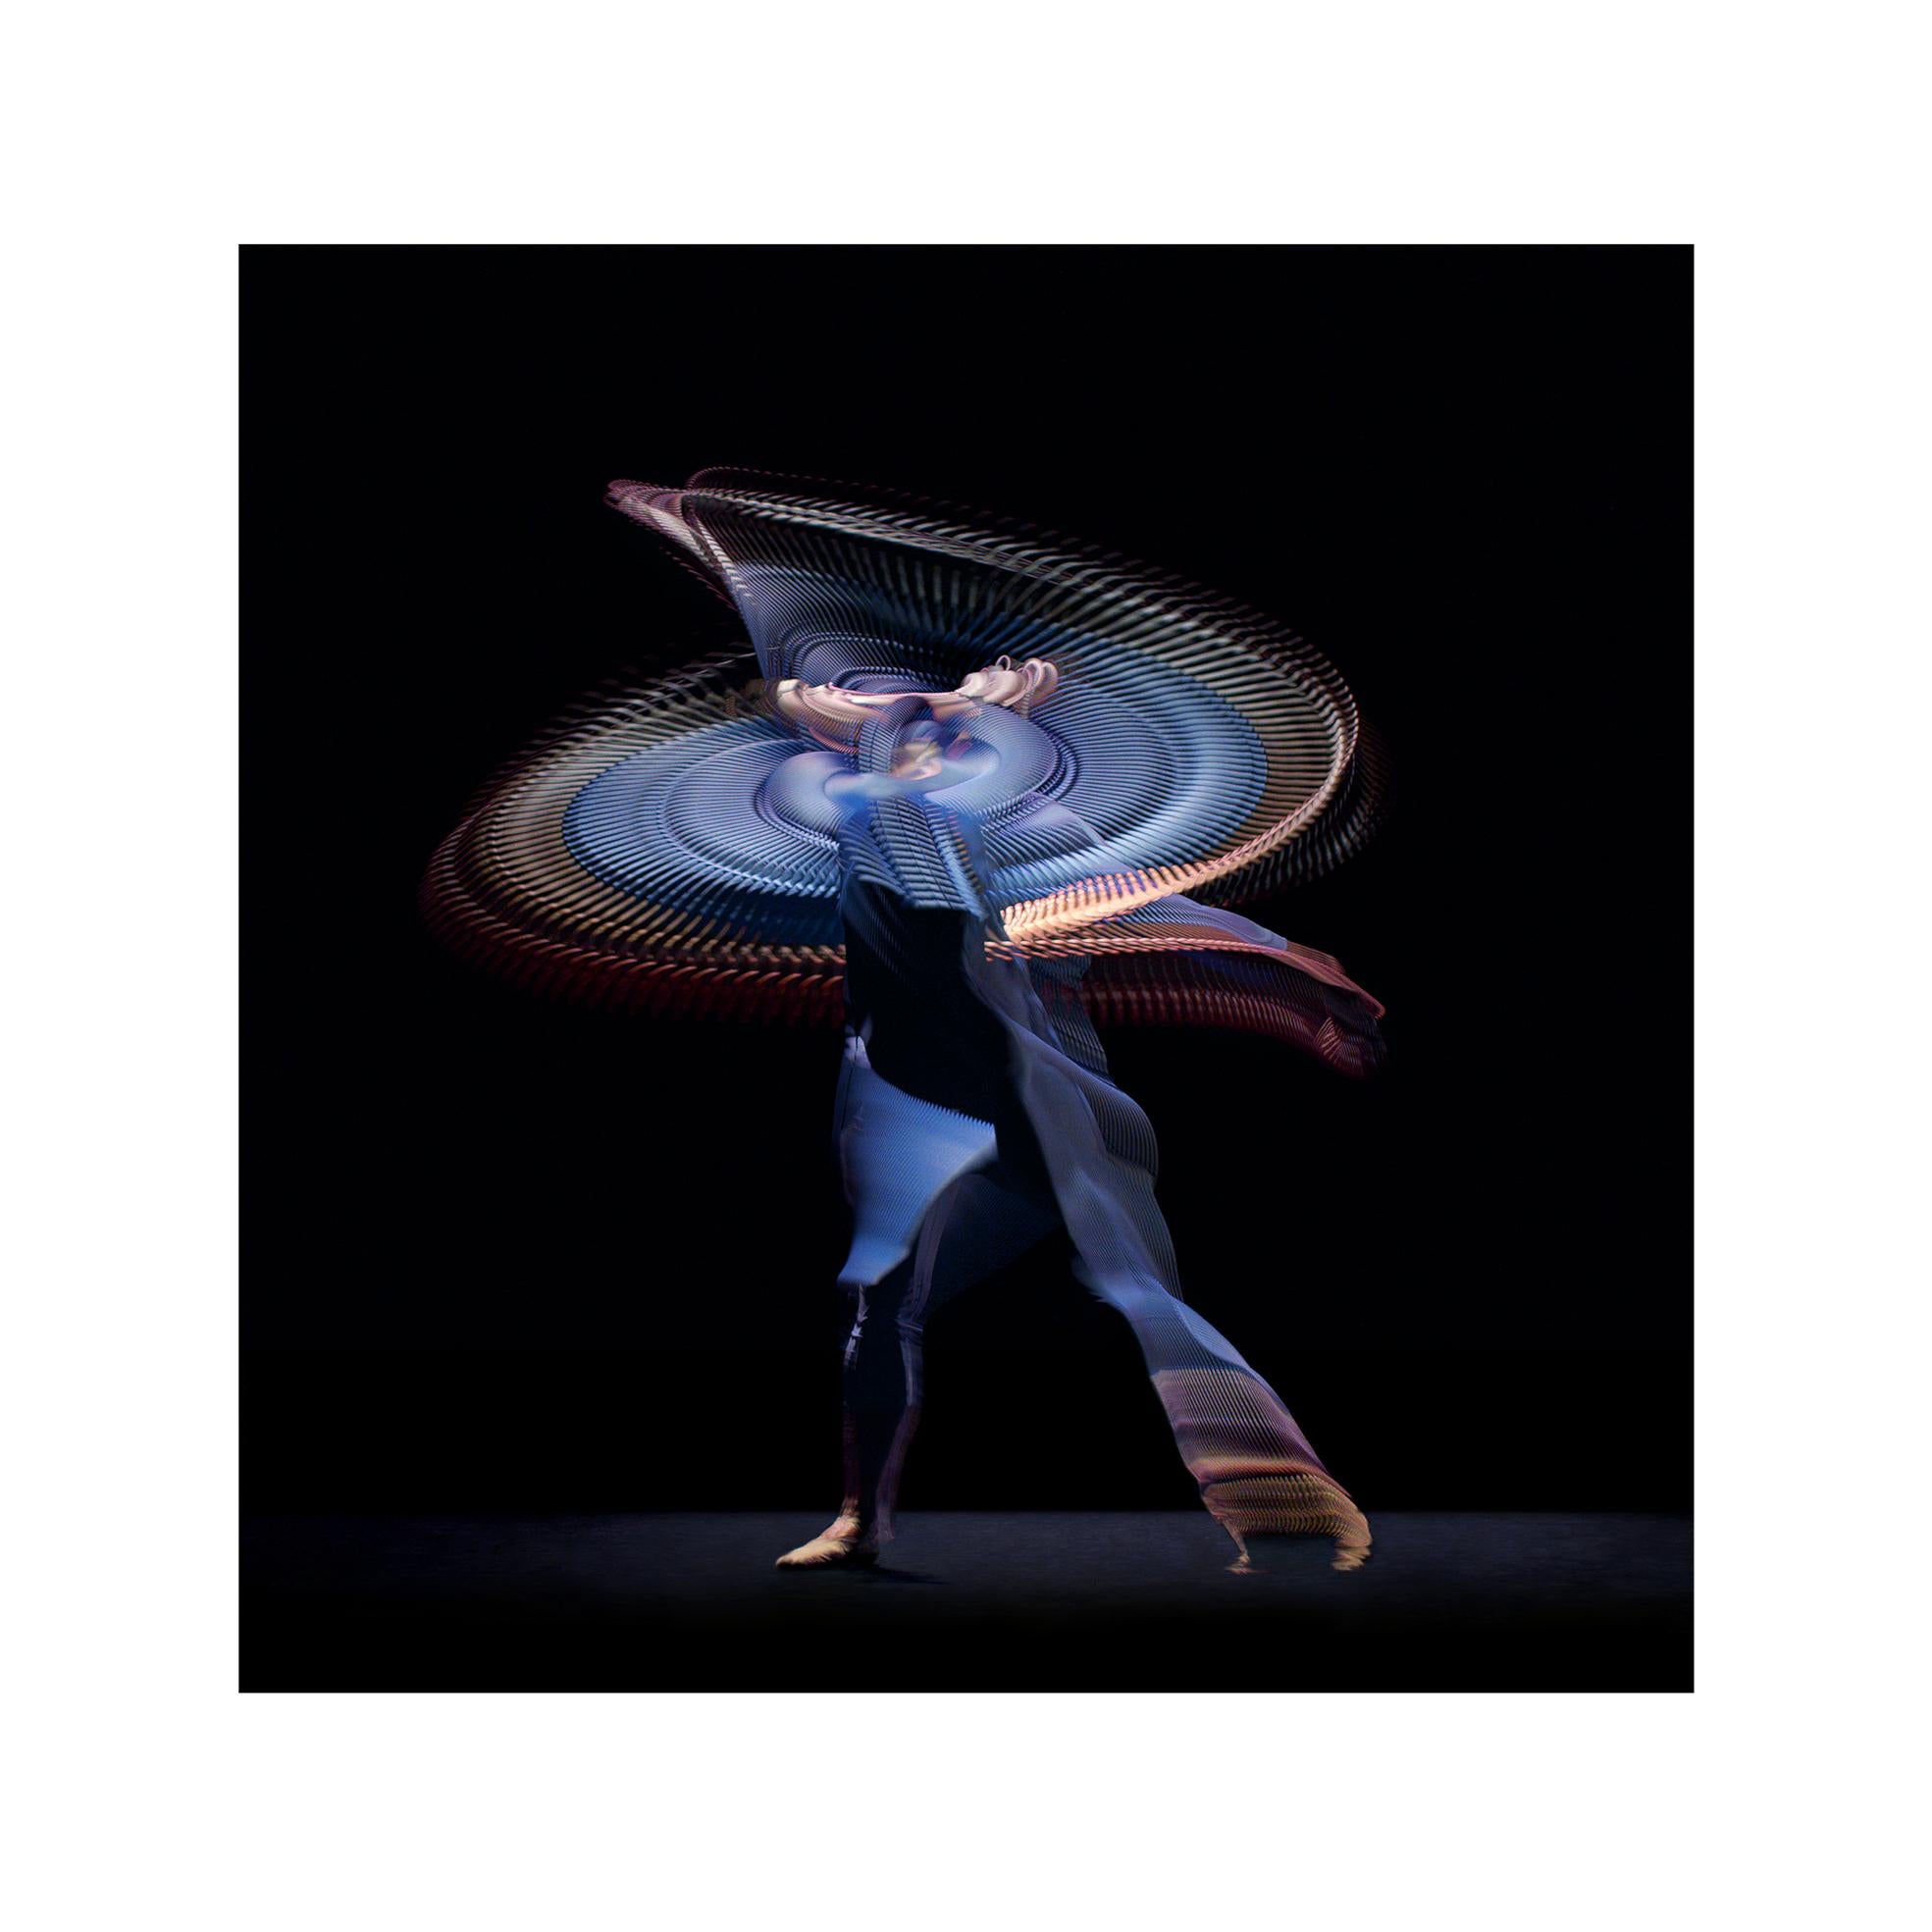 Abstract Dancers, Dark Blue 3, 2019 - Contemporary Photography, Ballet, Fashion